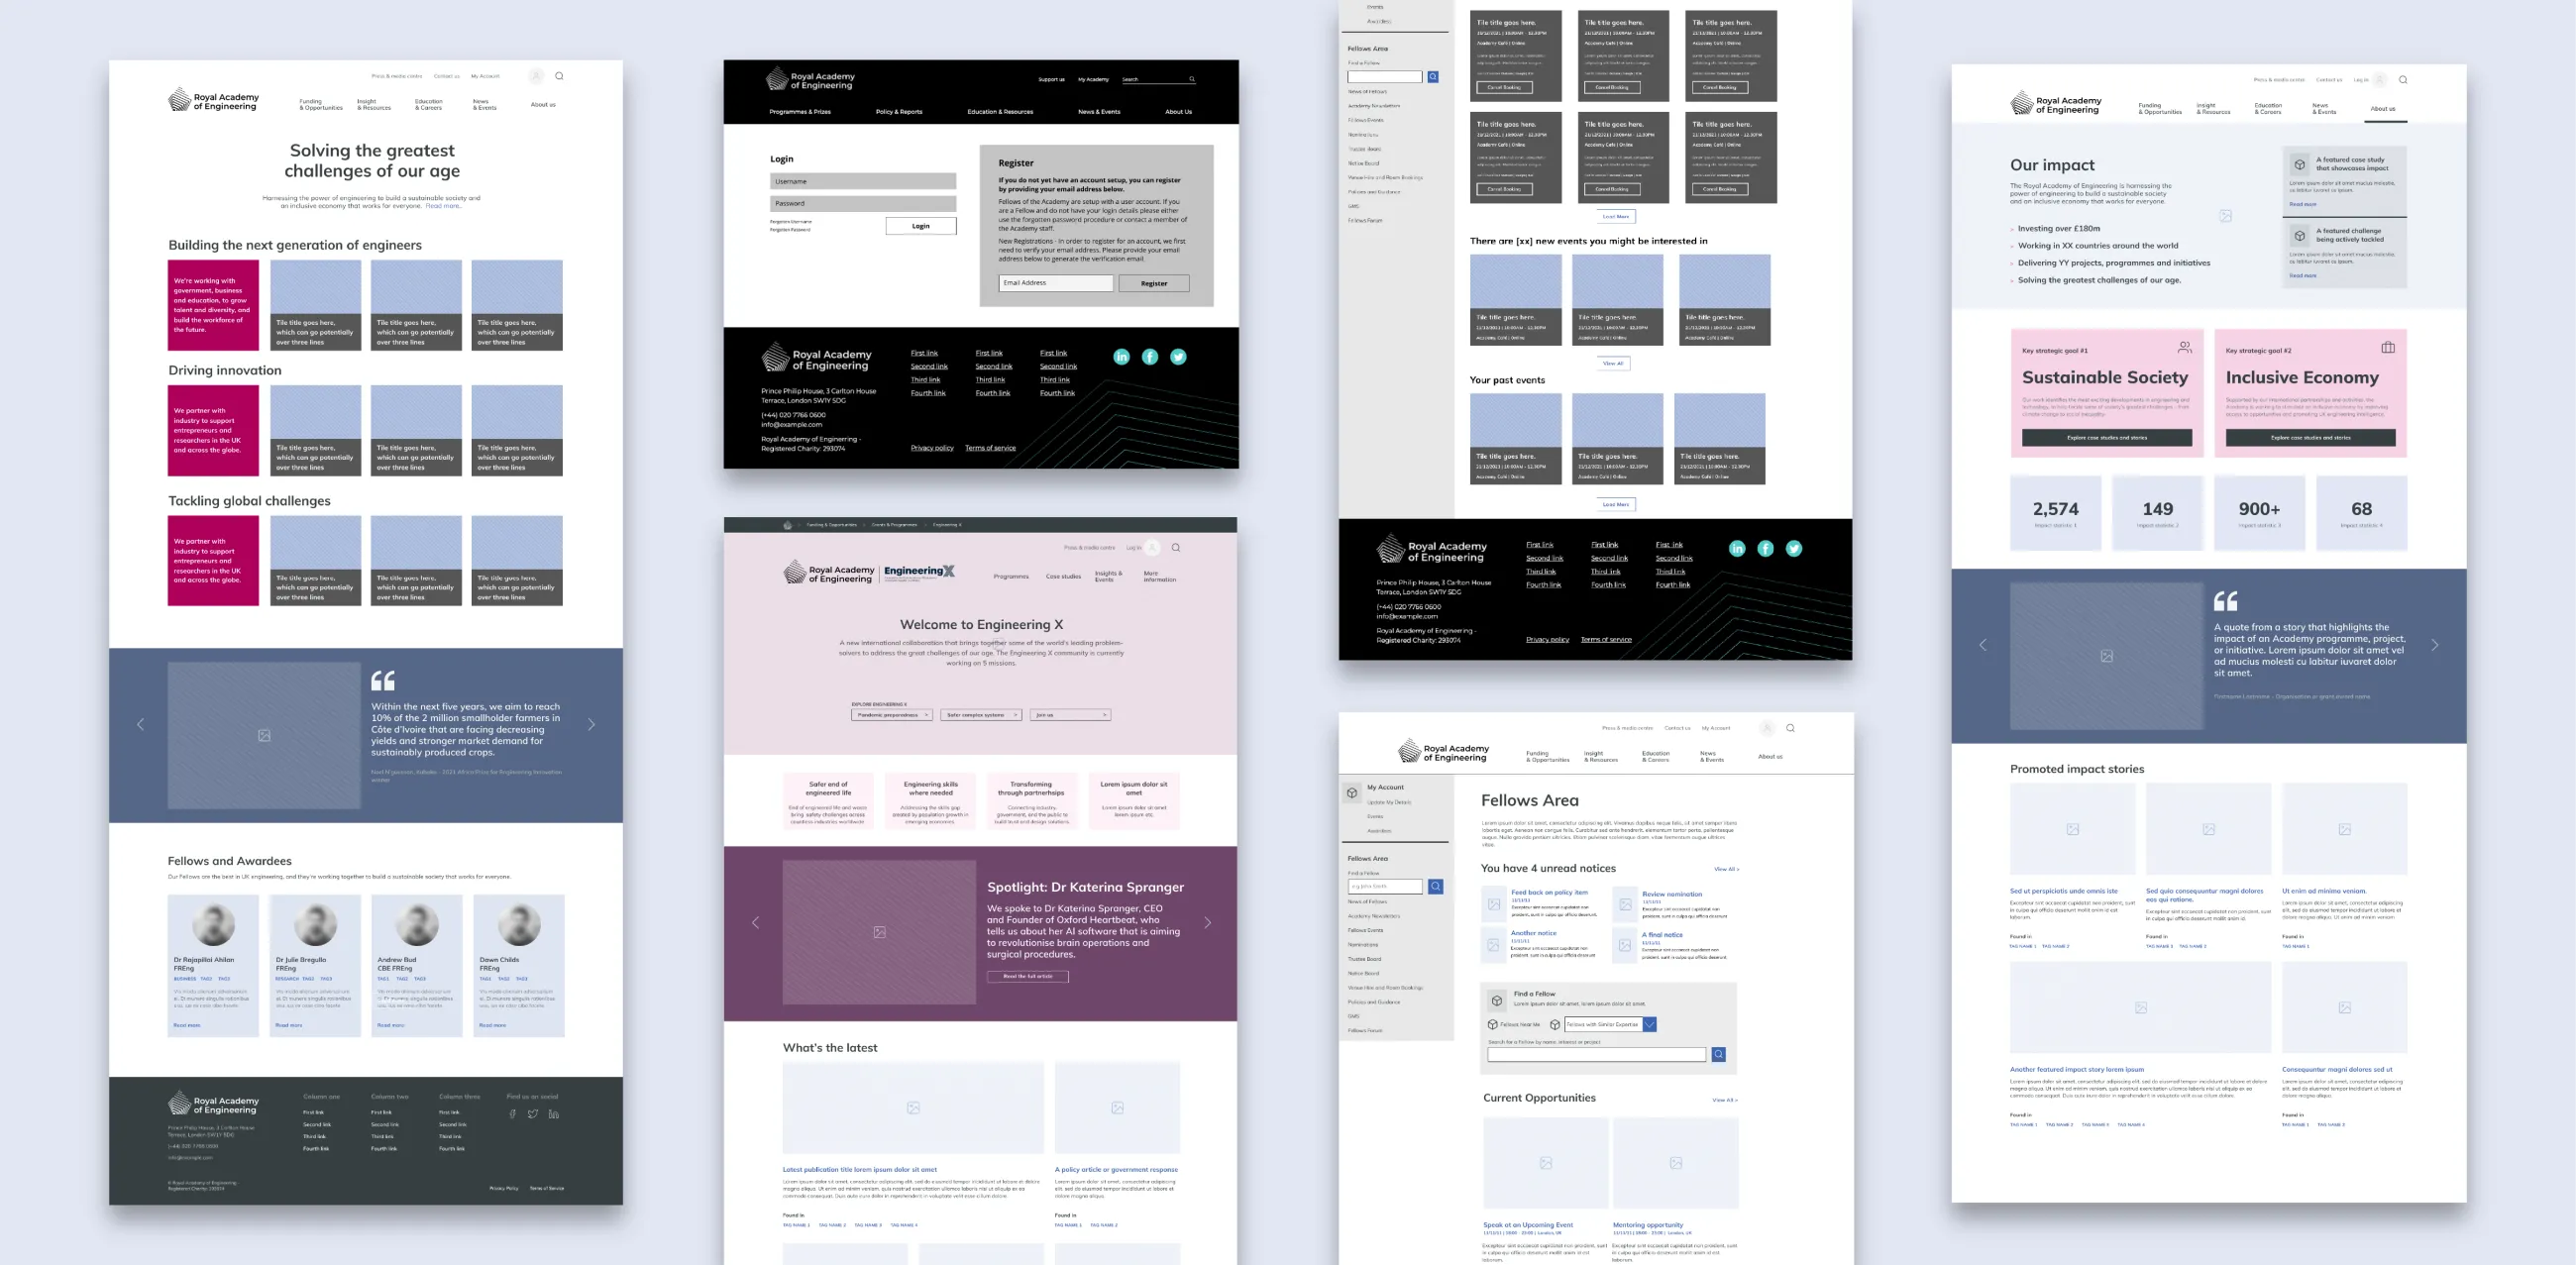 Wireframes for the Royal Academy of Engineering website